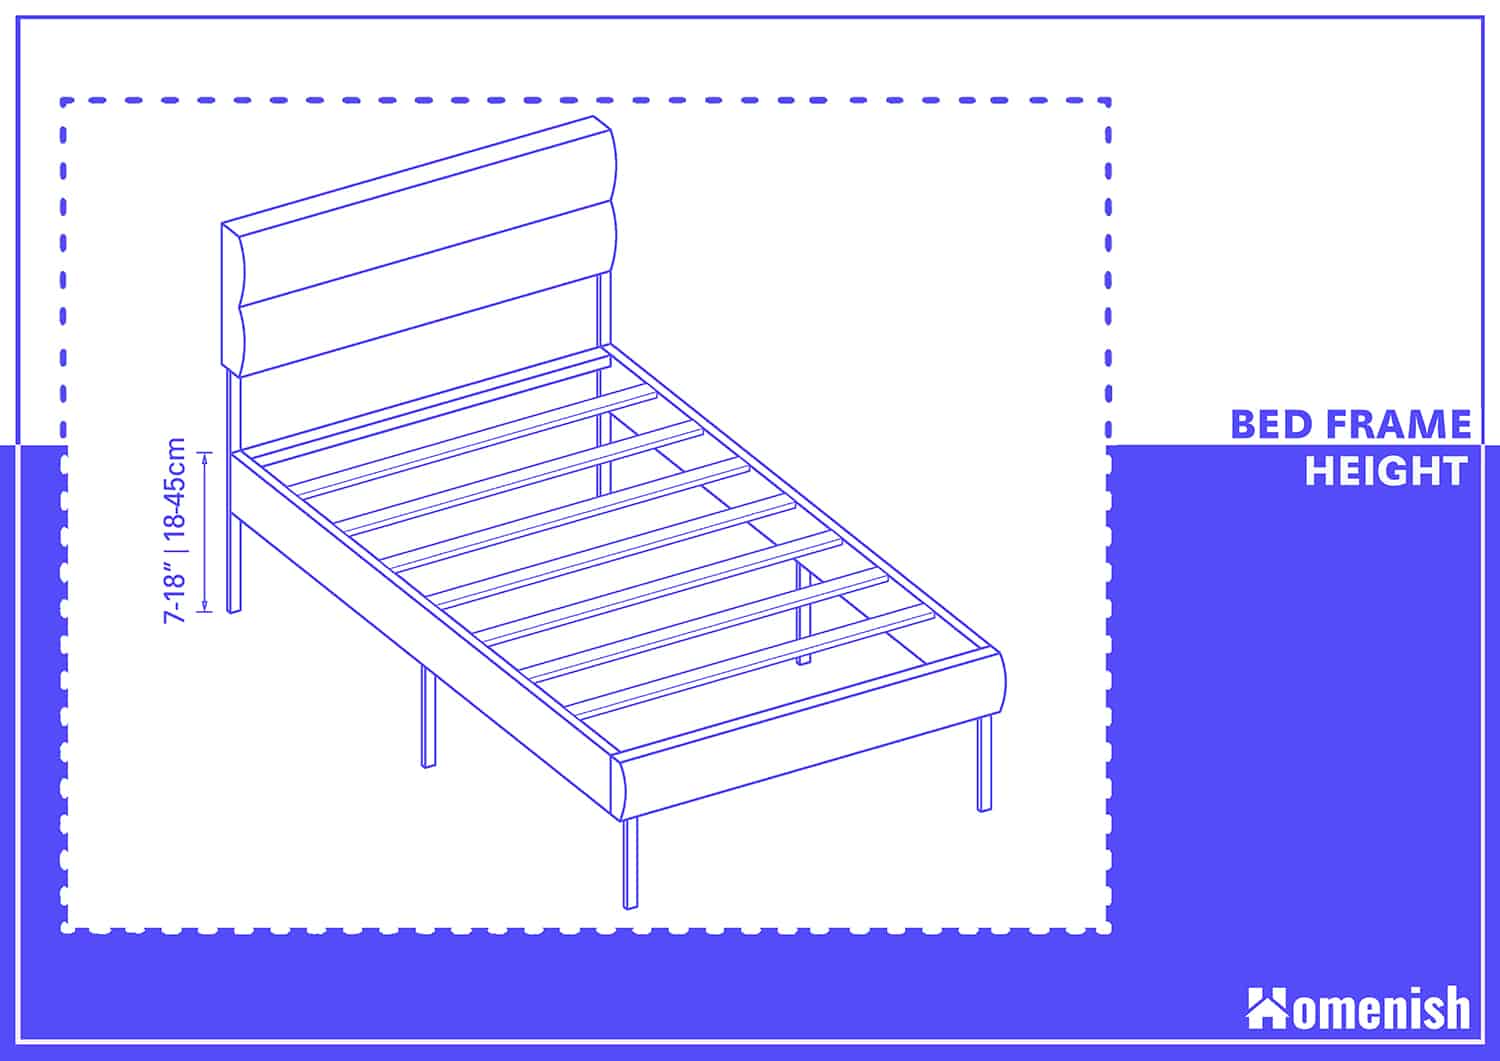 Guide To Bed Frame Dimension With, What Is The Measurements Of A Full Size Bed Frame